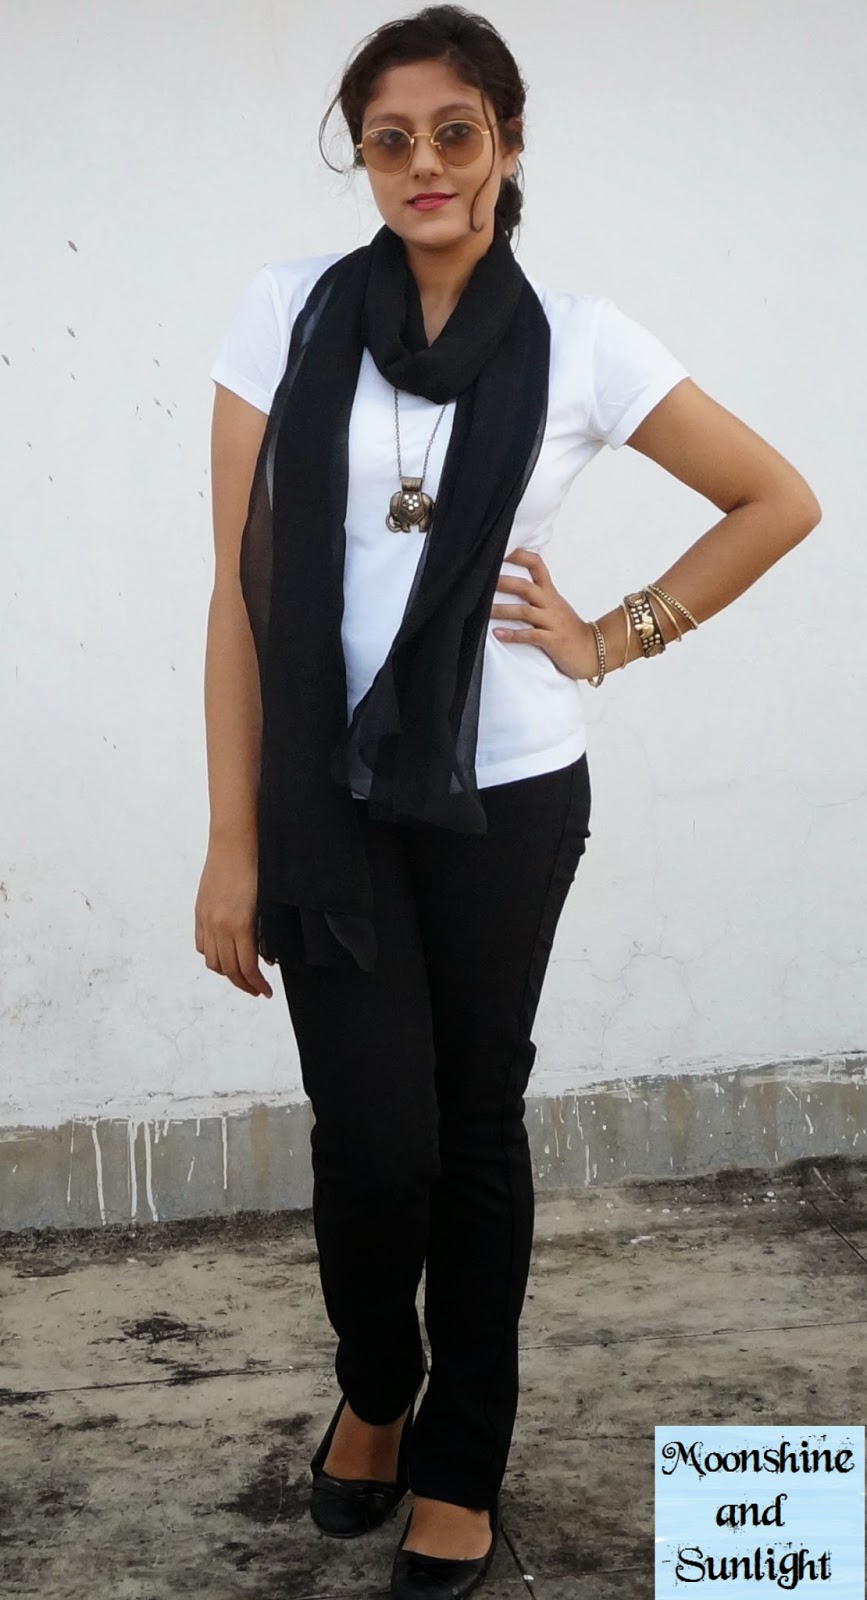 Indian Fashion blog - First OOTD First shades